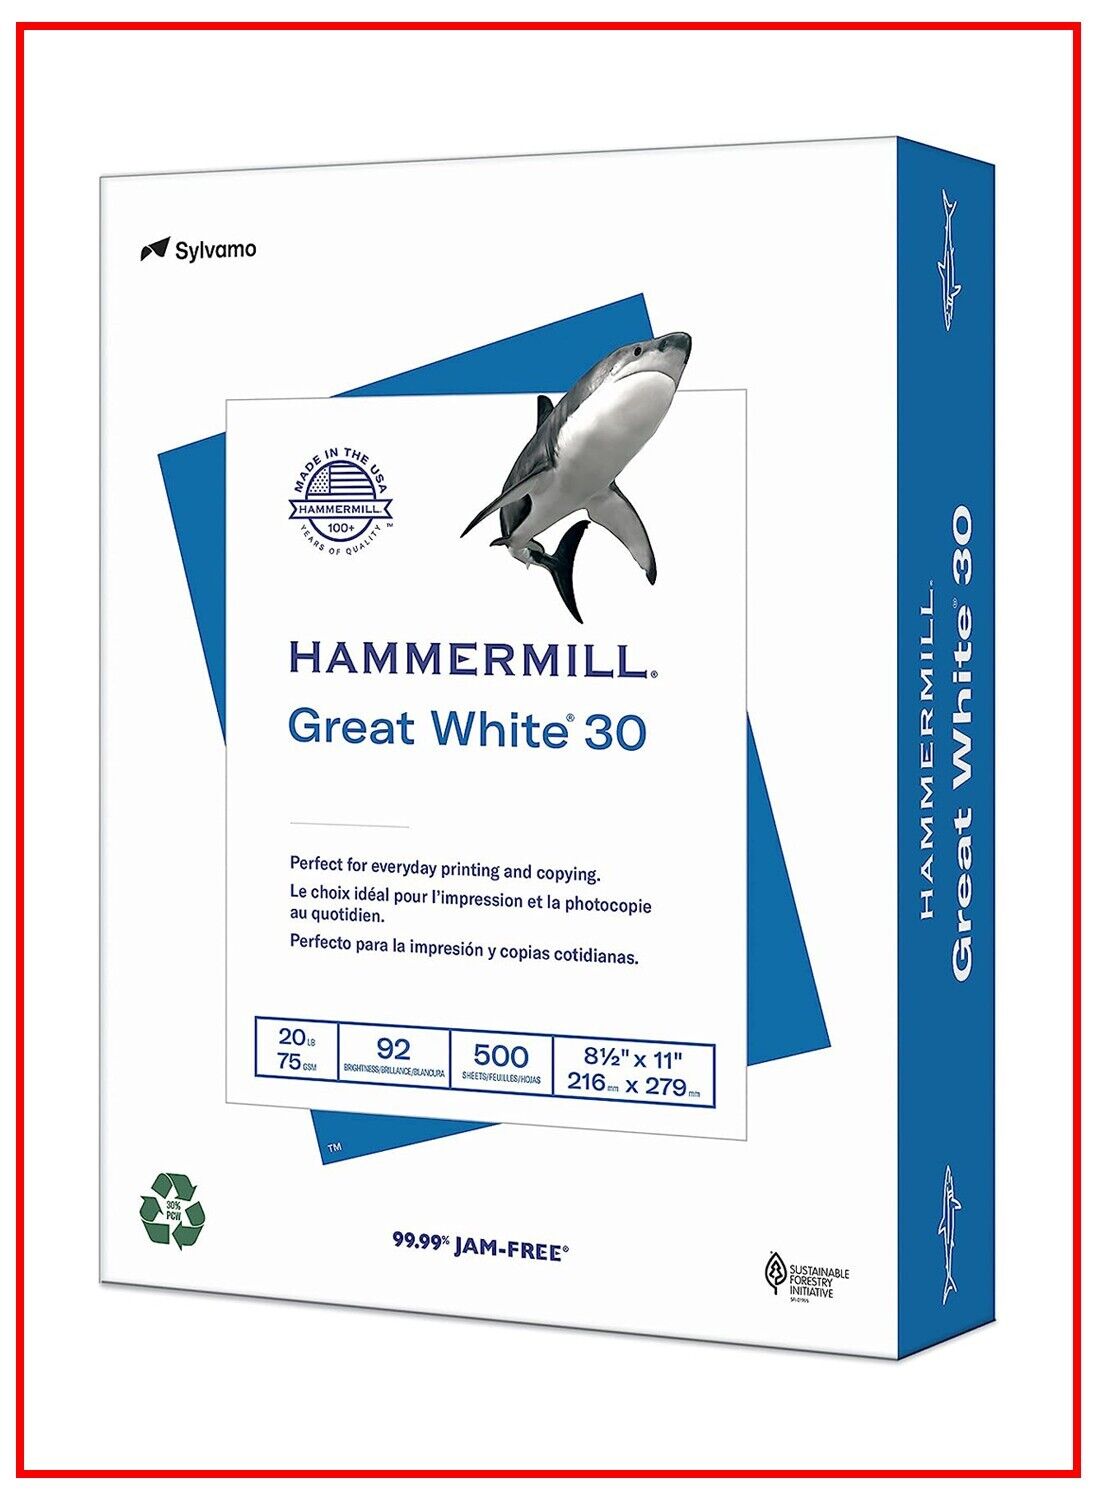 3 Reams (1500 Sheets) - Hammermill Printer Paper, Great White 30%, 8.5x11